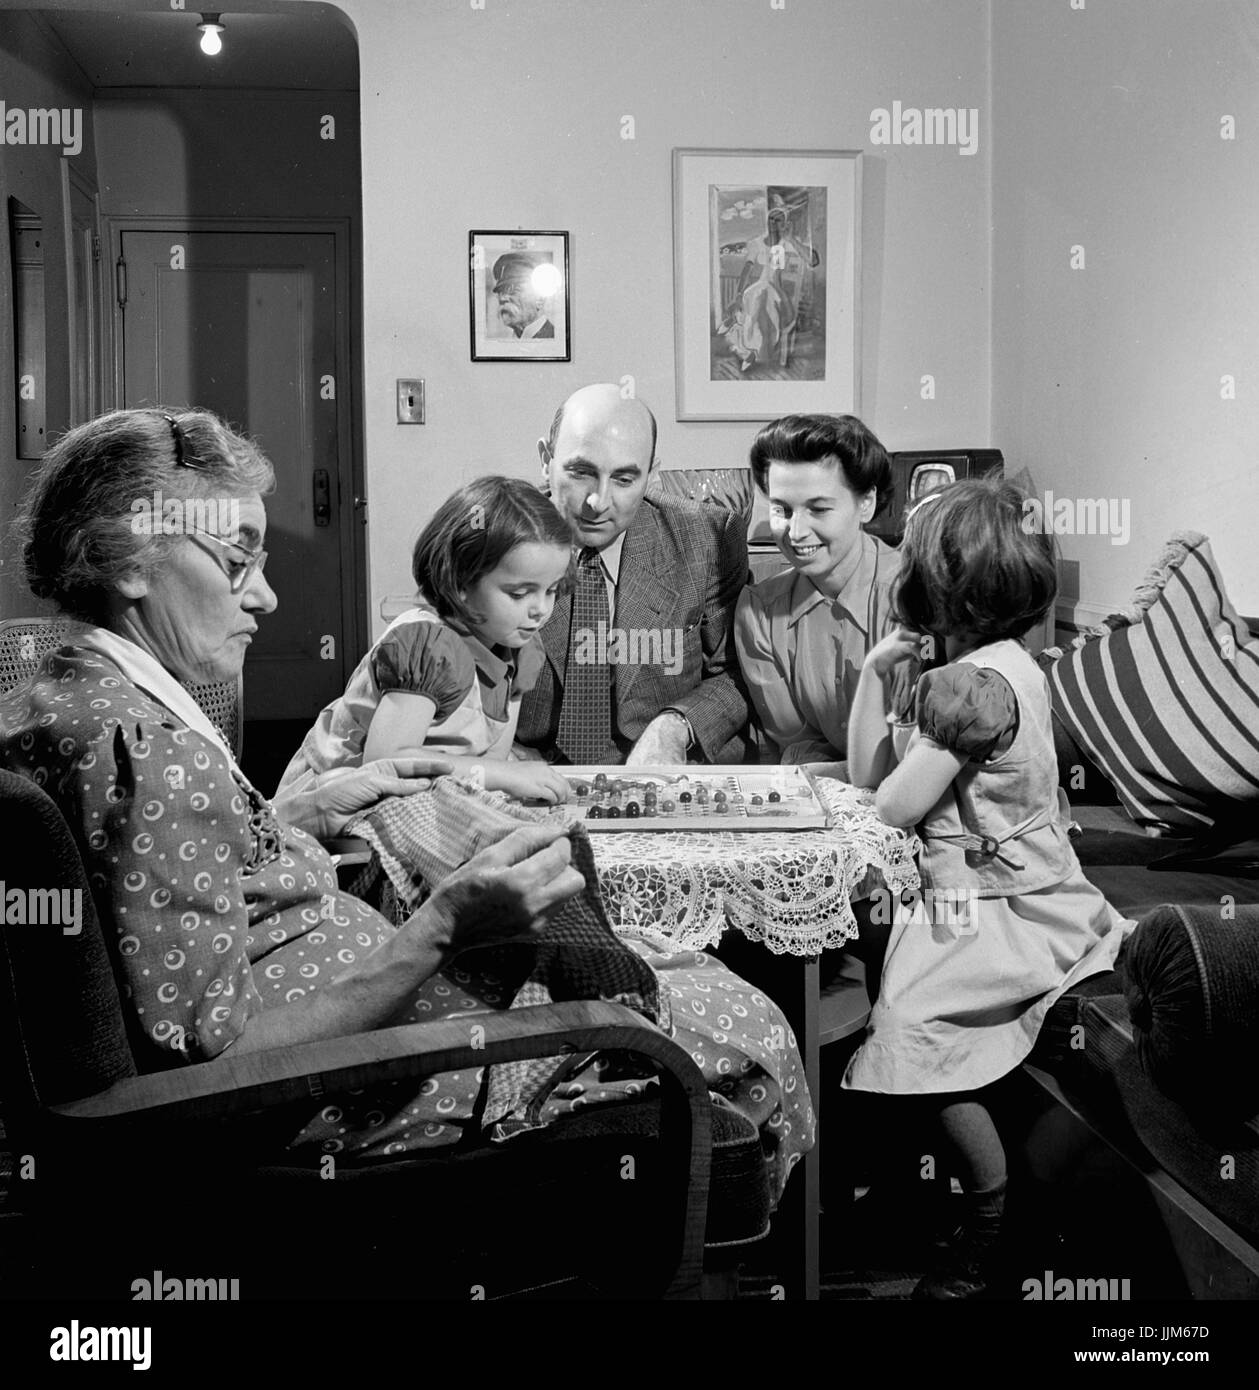 New York, New York. Dr. and Mrs. Winn [or Wynn], Janet and Marie, a Czech-American family, playing Chinese checkers while their grandmother knits.Collins, Marjory, 1912-1985, photographer.CREATED/PUBLISHED1942 Oct. Stock Photo